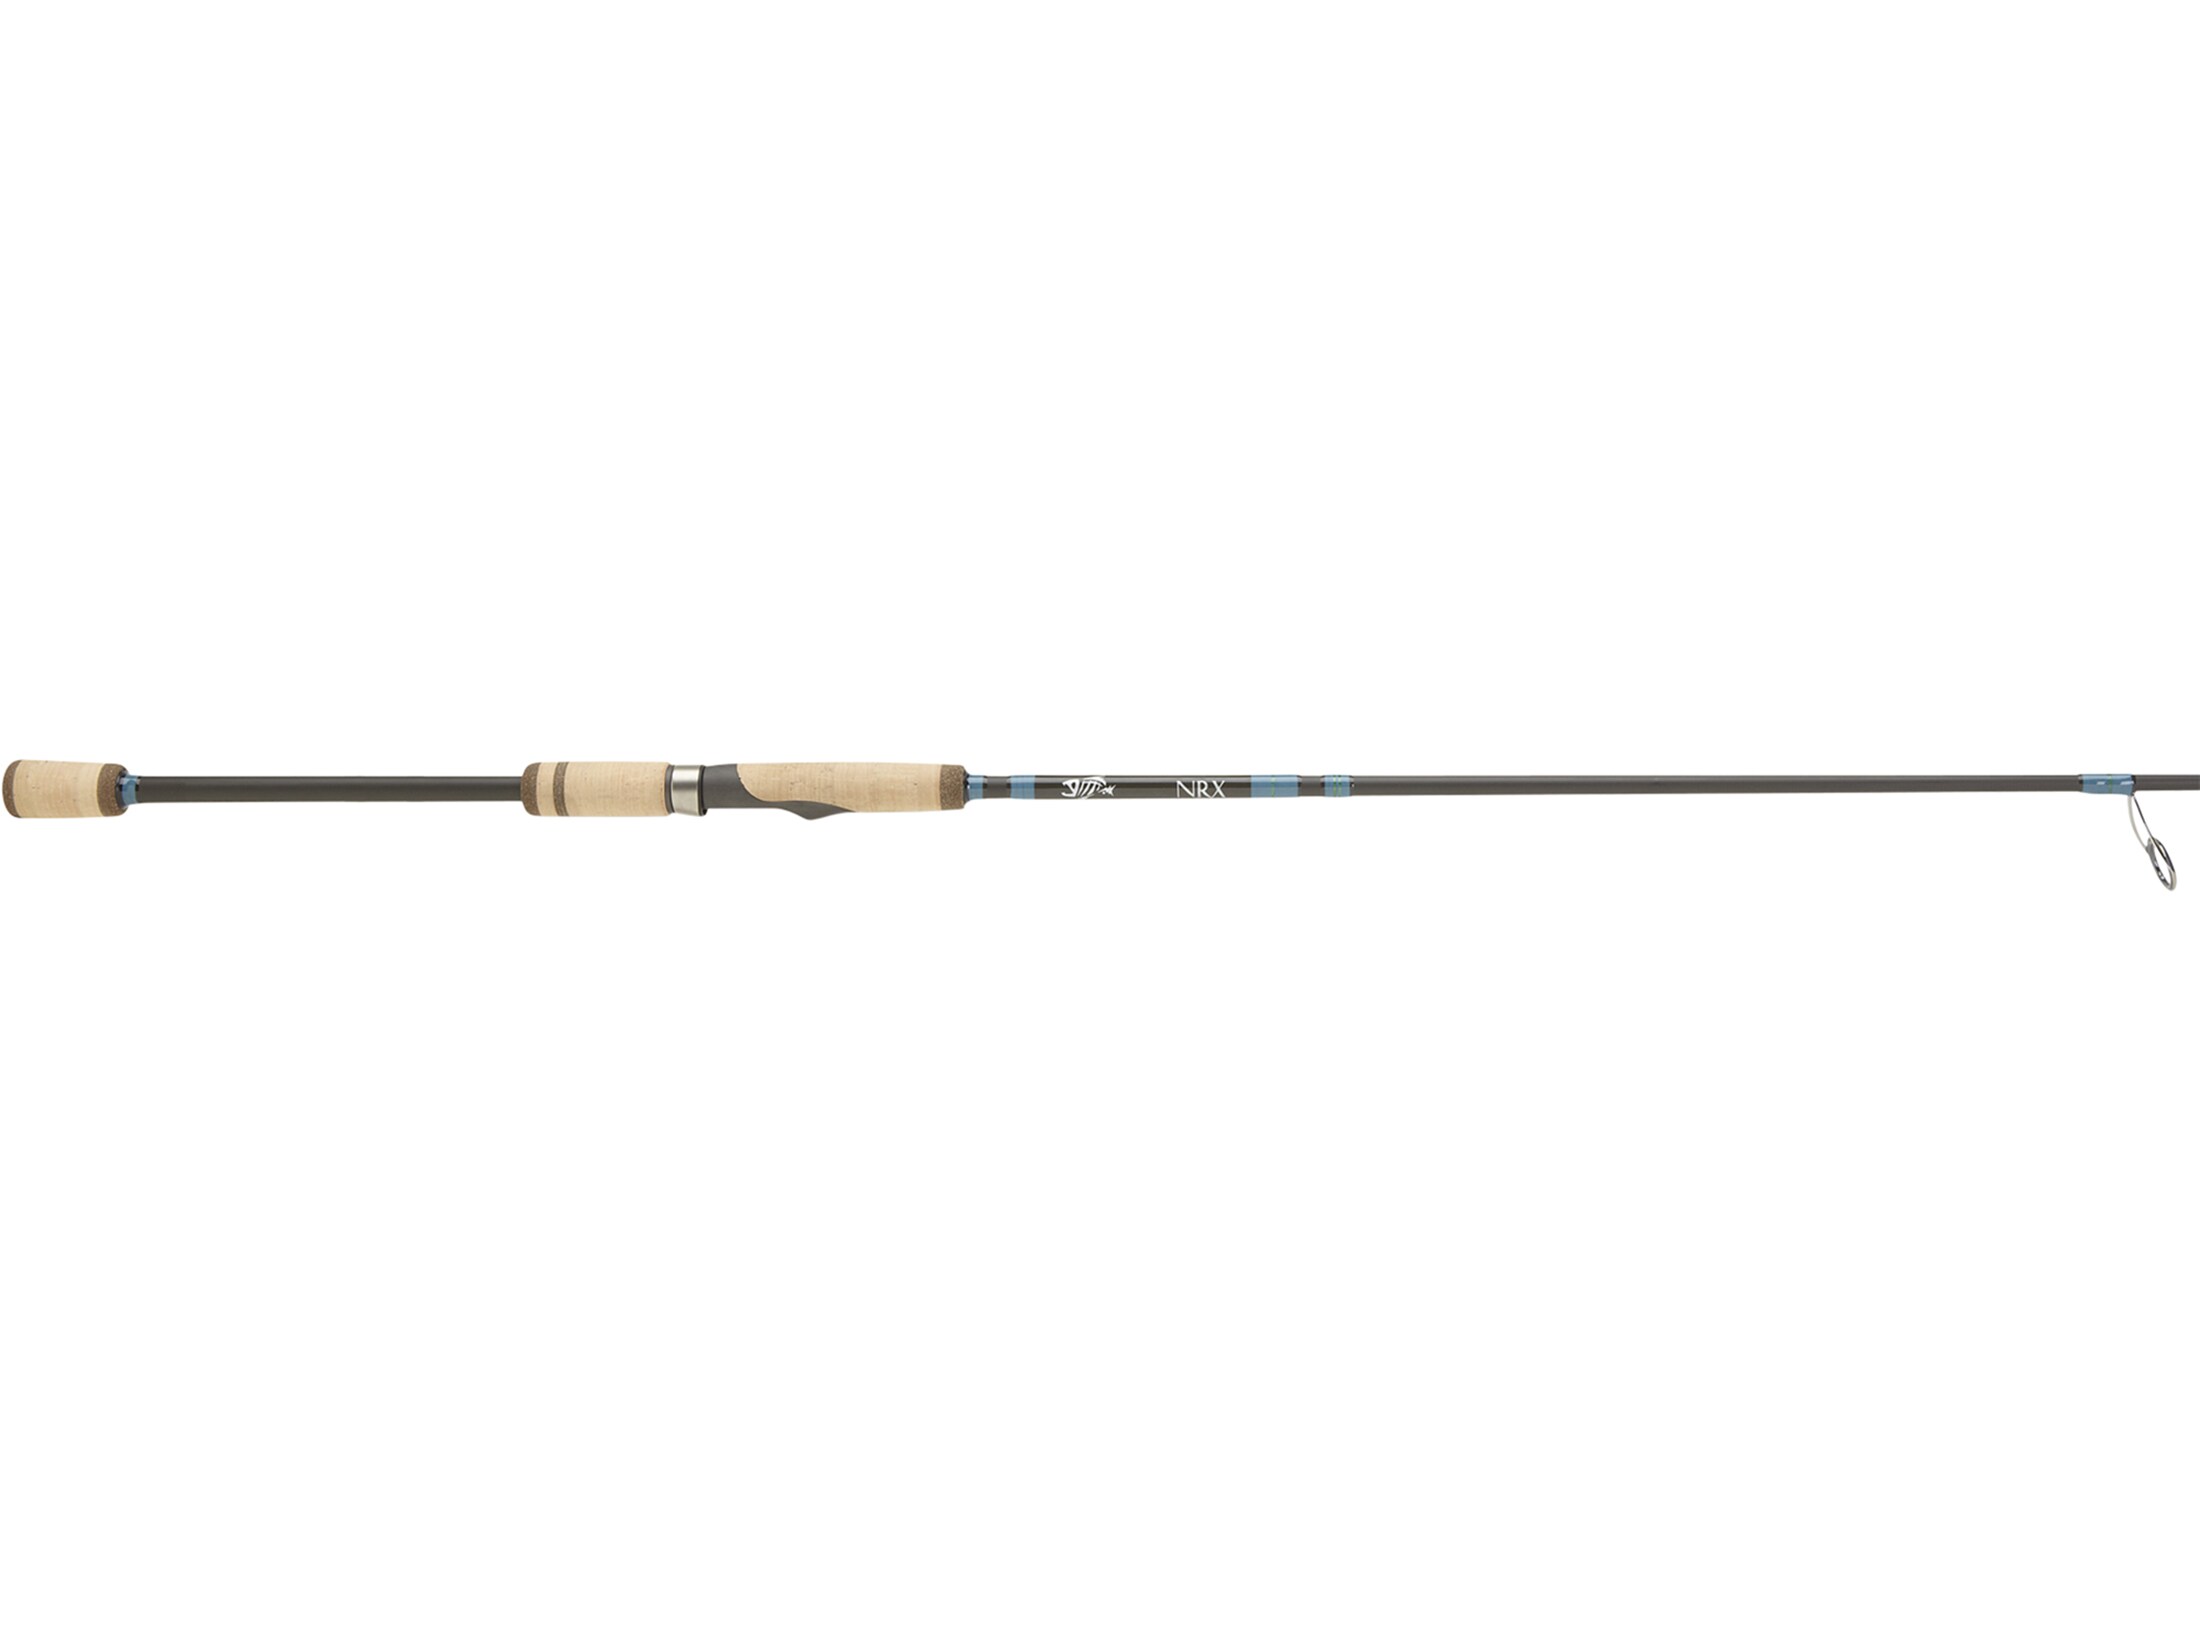 G Loomis Trout Series Spinning Rod TSR690S 5'9" Ultra Light 1pc 